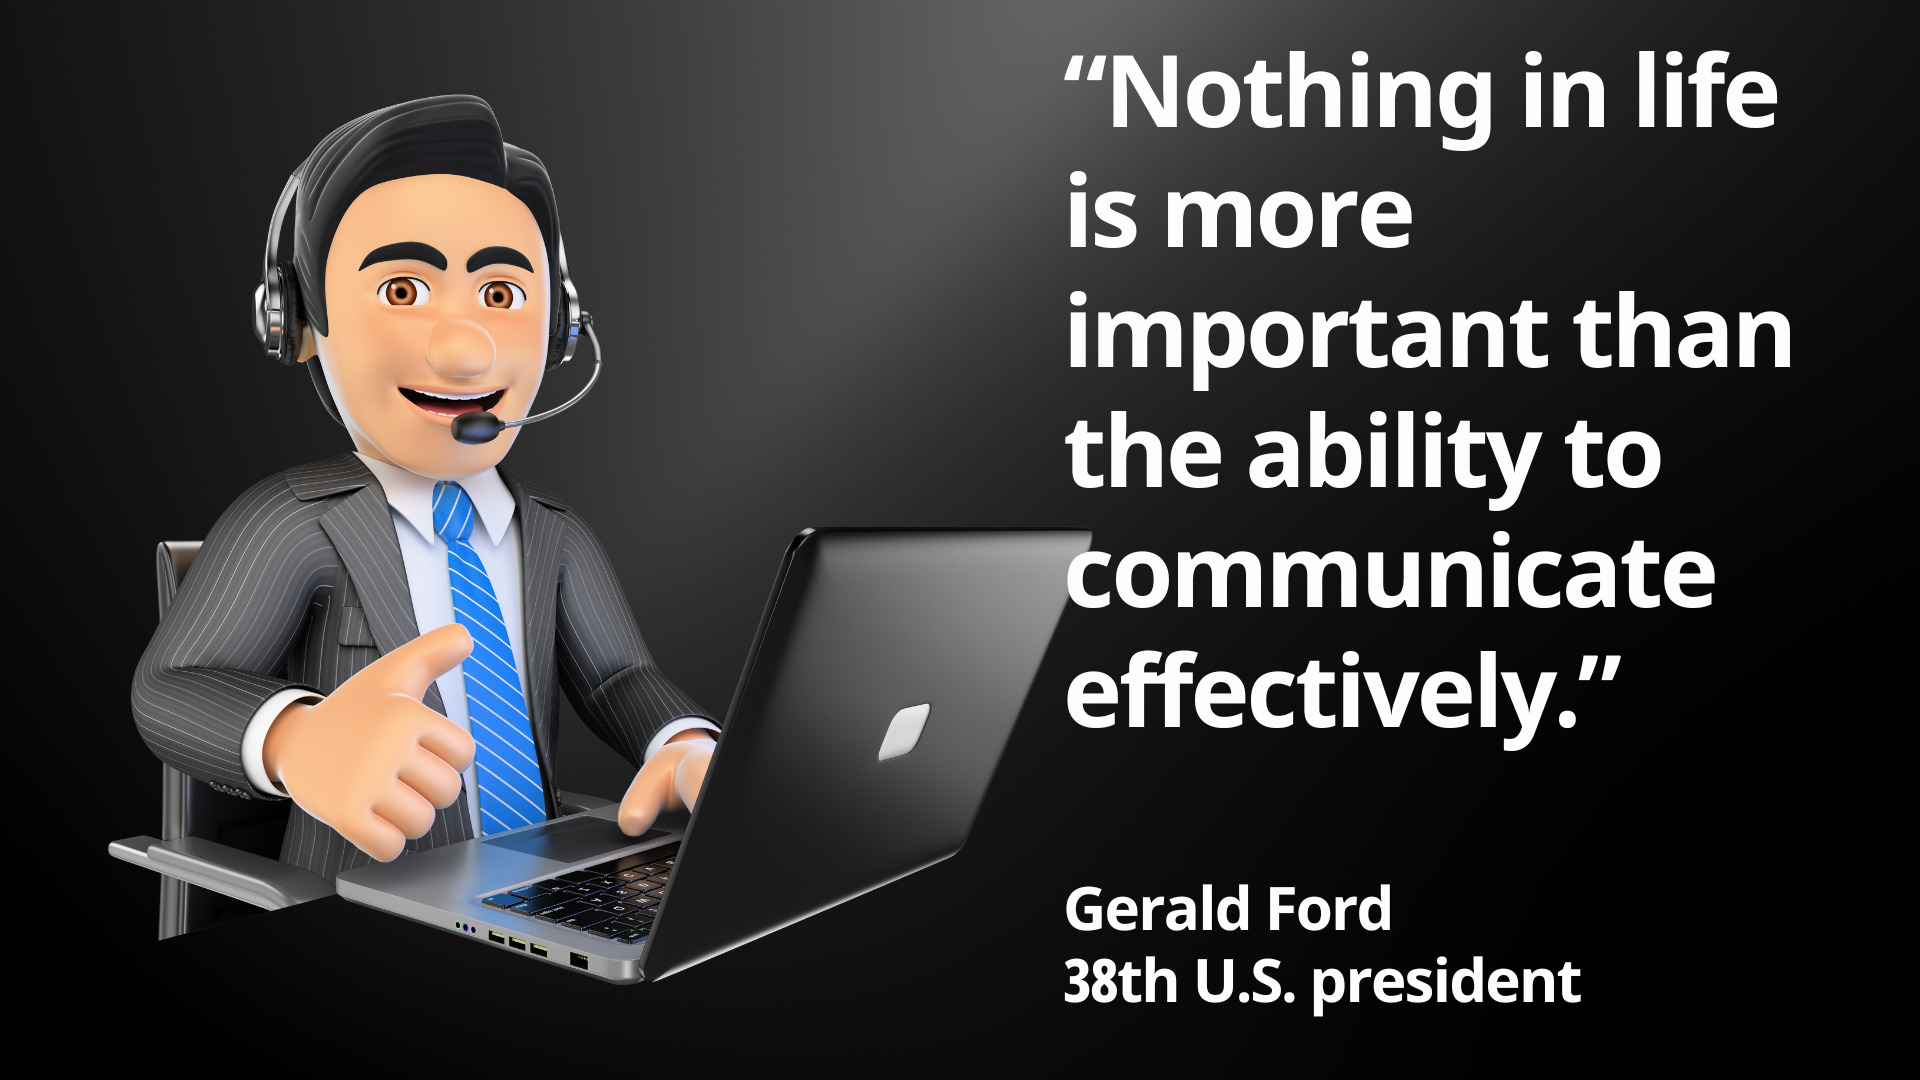 Nothing in life is more important than the ability to communicate effectively.” Gerald Ford 38th U.S. president